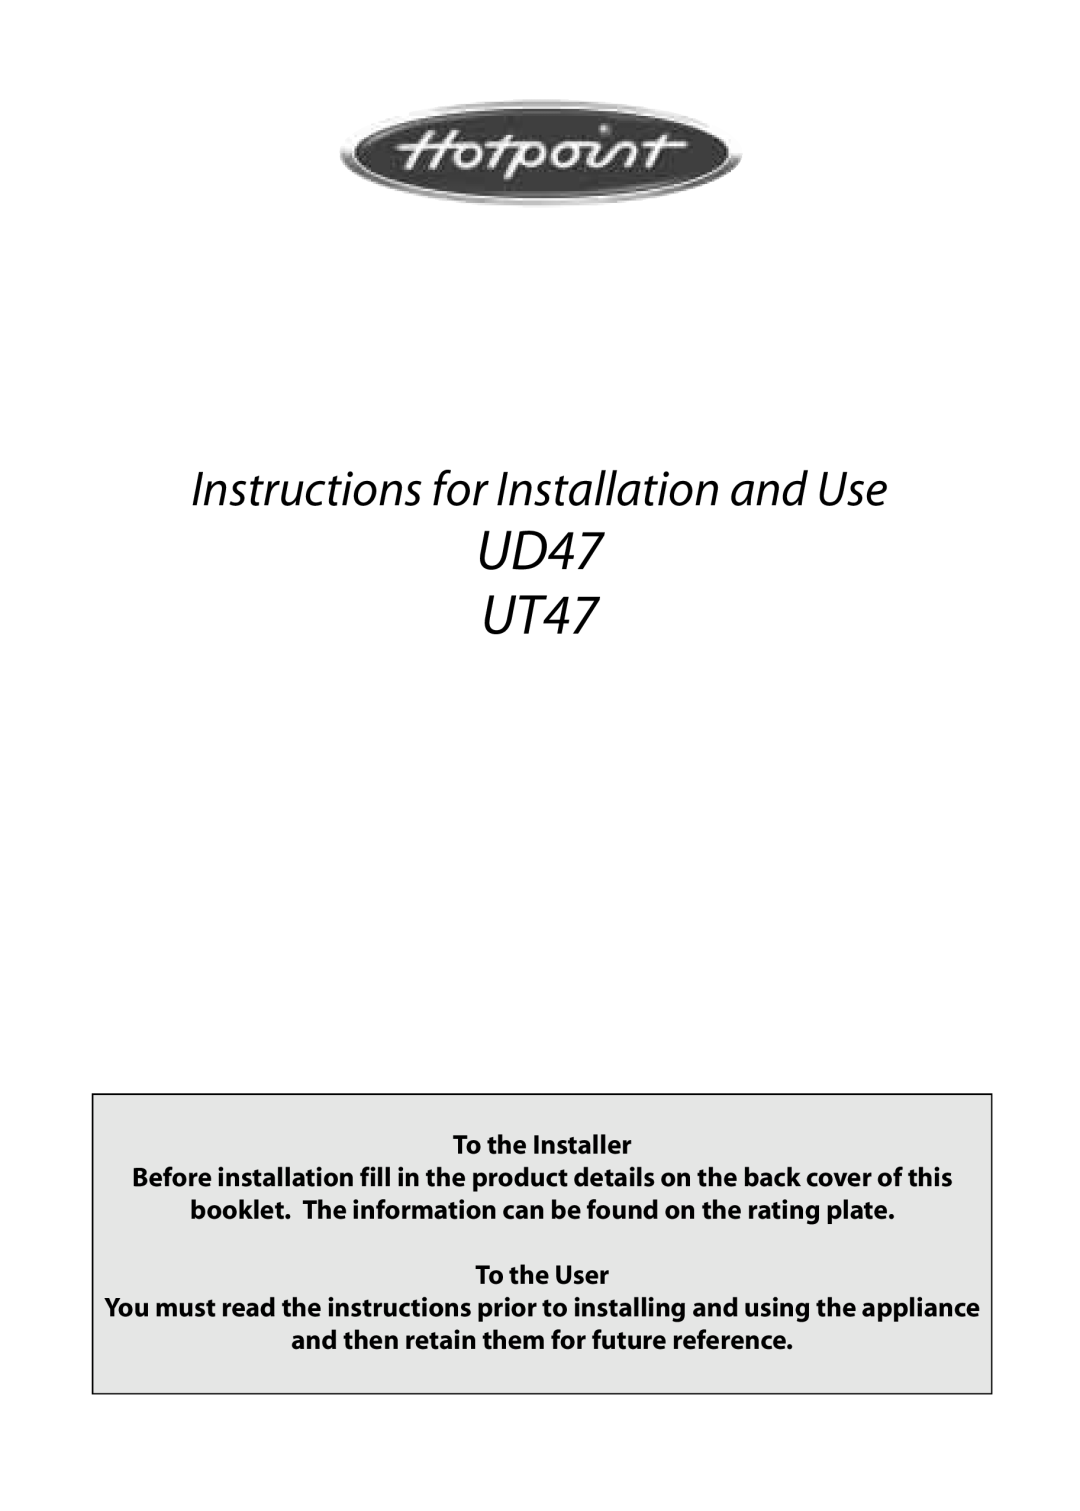 Hotpoint manual To the Installer, To the User, and then retain them for future reference, UD47 UT47 